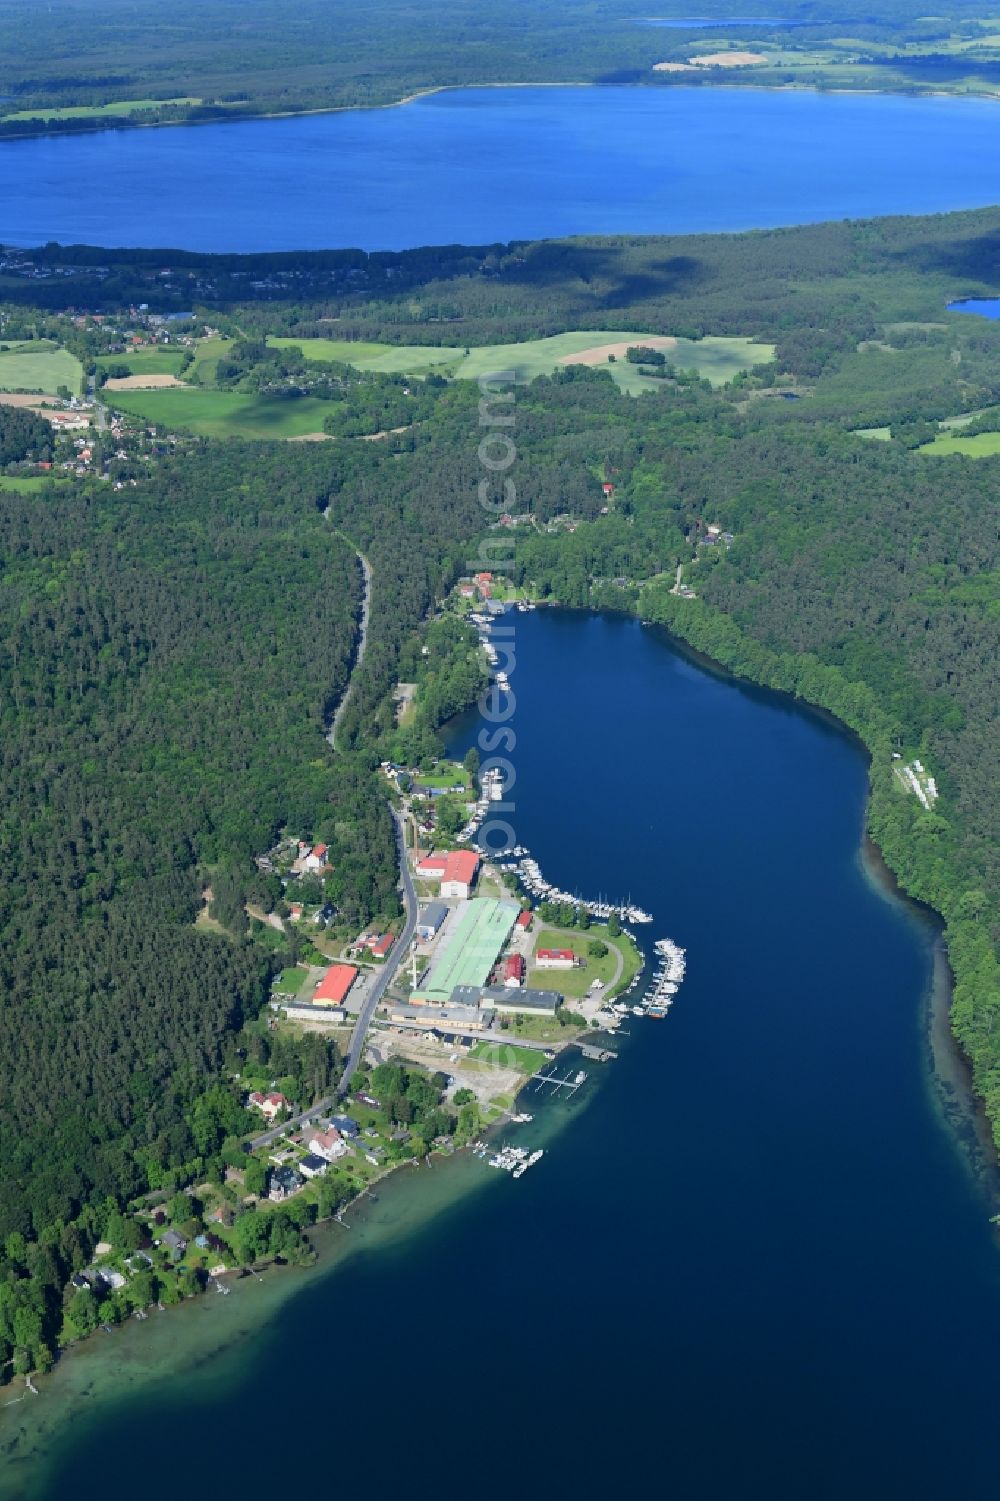 Joachimsthal from above - Pleasure boat marina with docks and moorings on the shore area of Werbellinsee on Seerandstrasse in Joachimsthal in the state Brandenburg, Germany